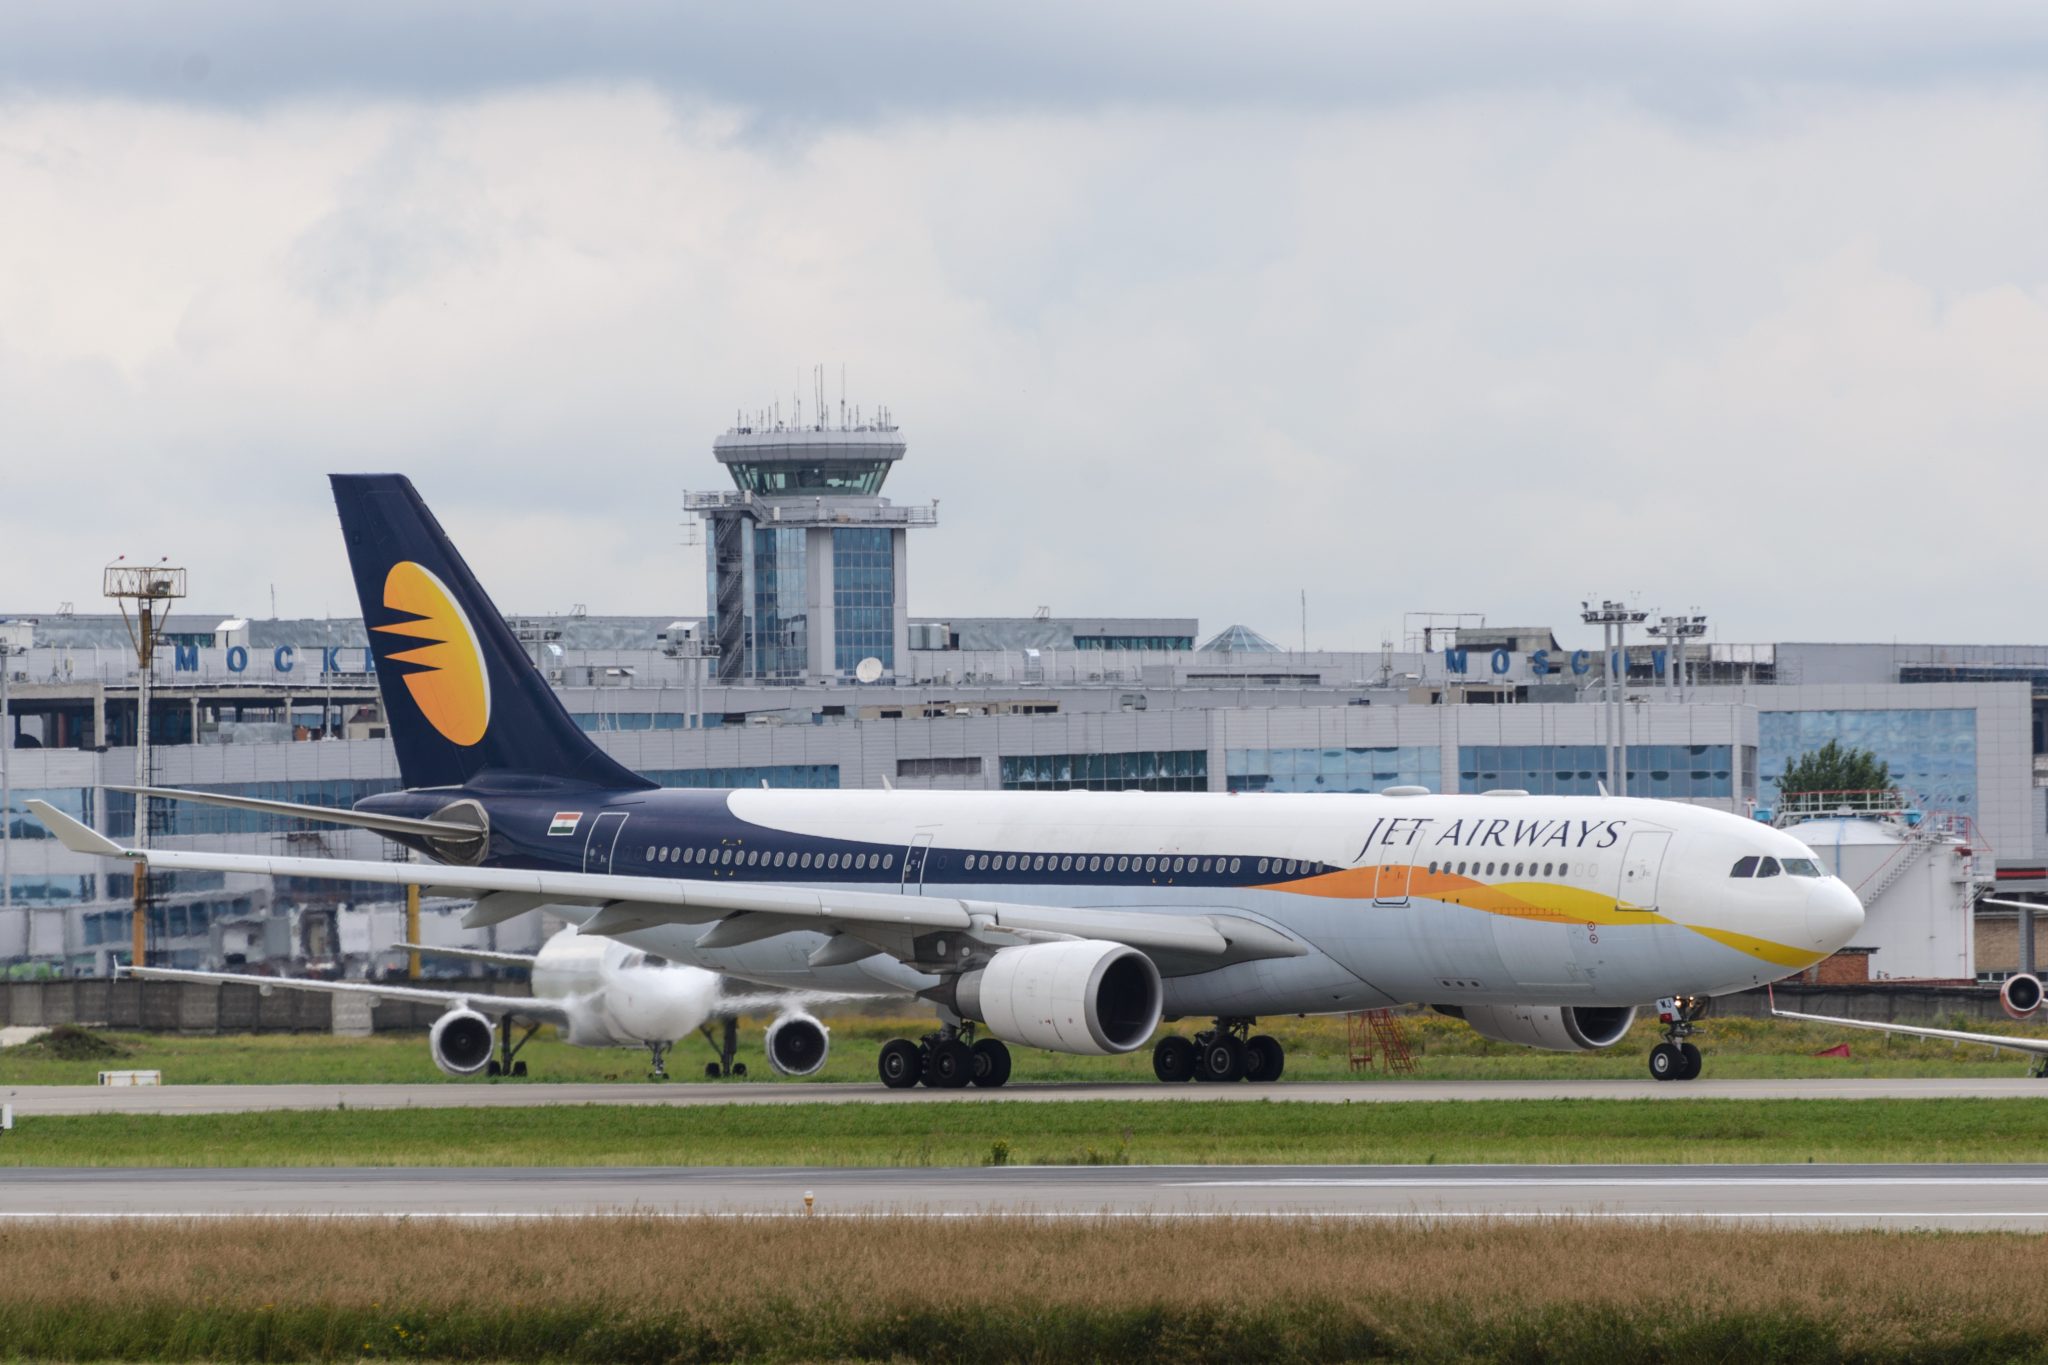 Three top executives resign from Jet Airways ahead of launch